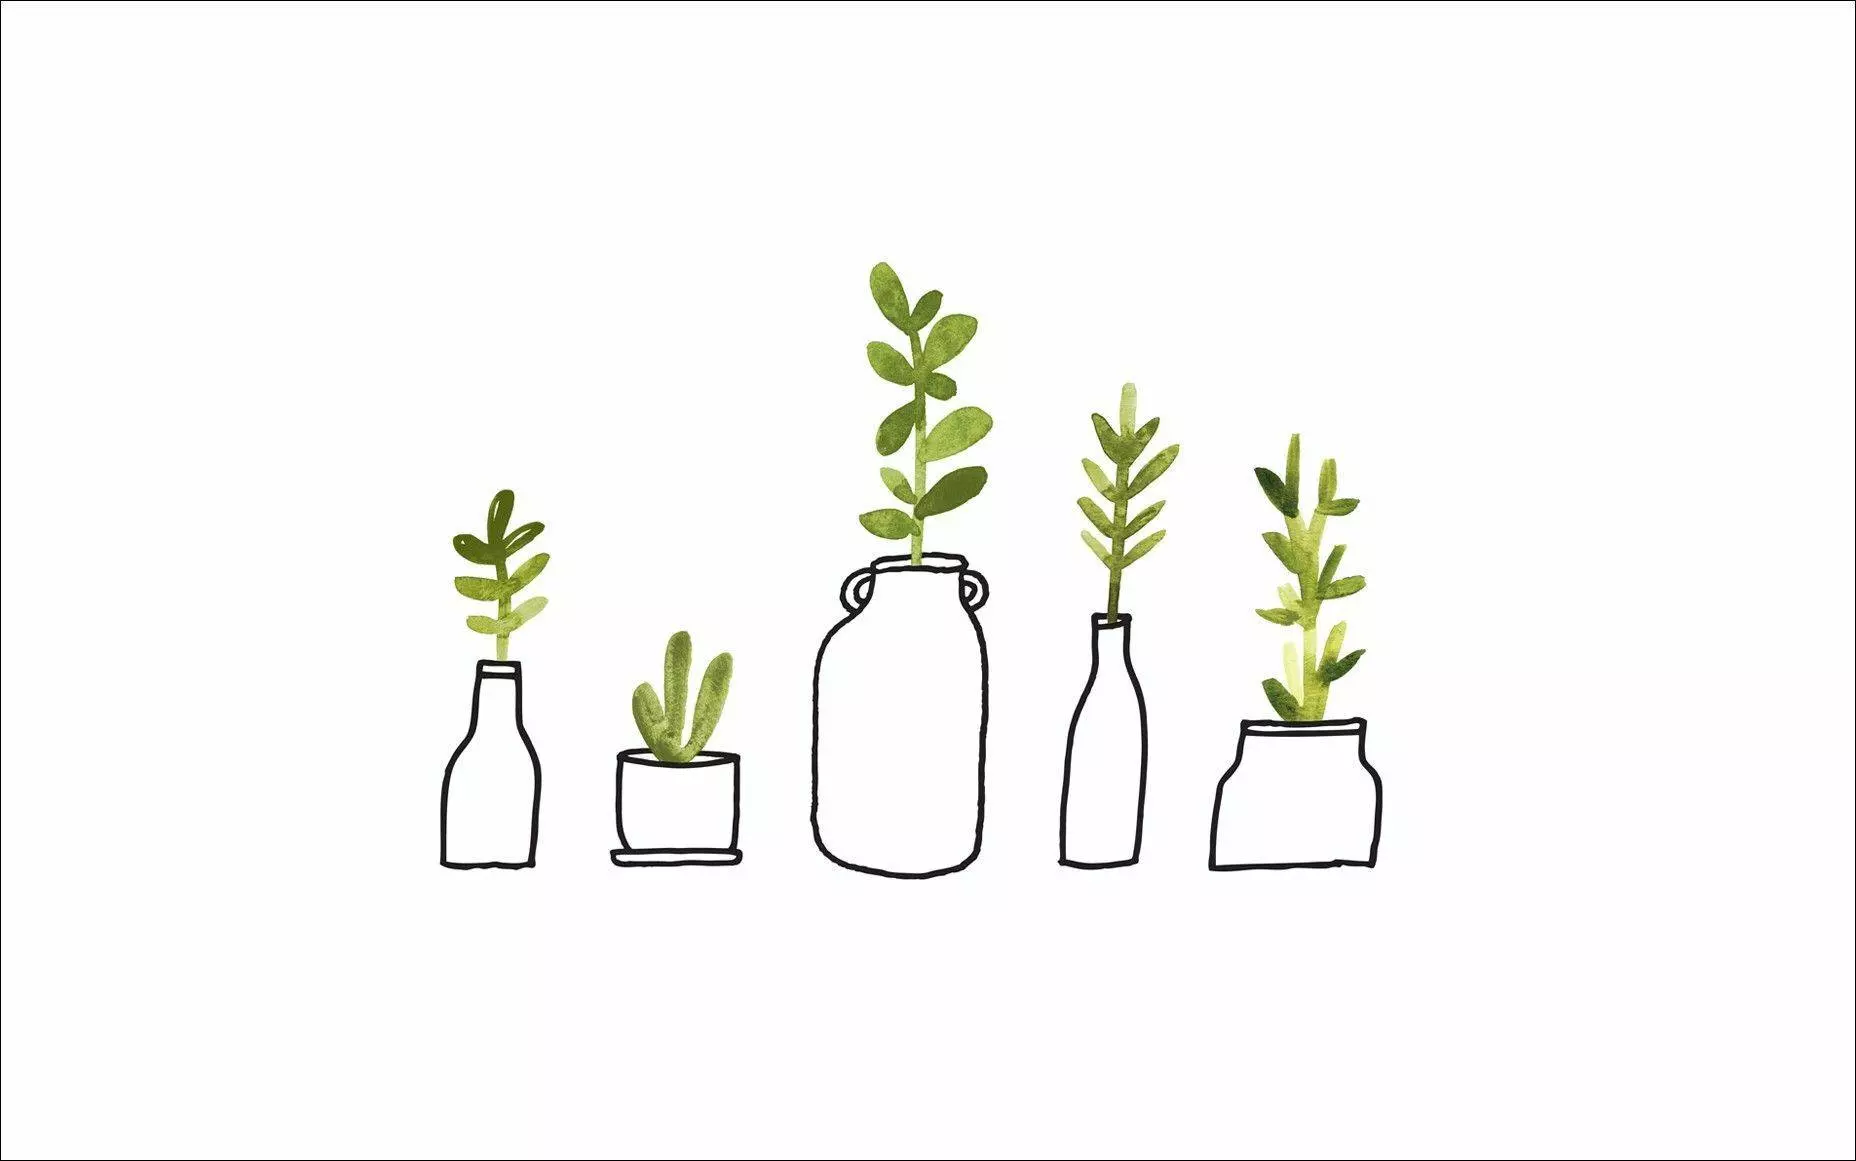 An illustration of 5 potted plants on a white background - Plants